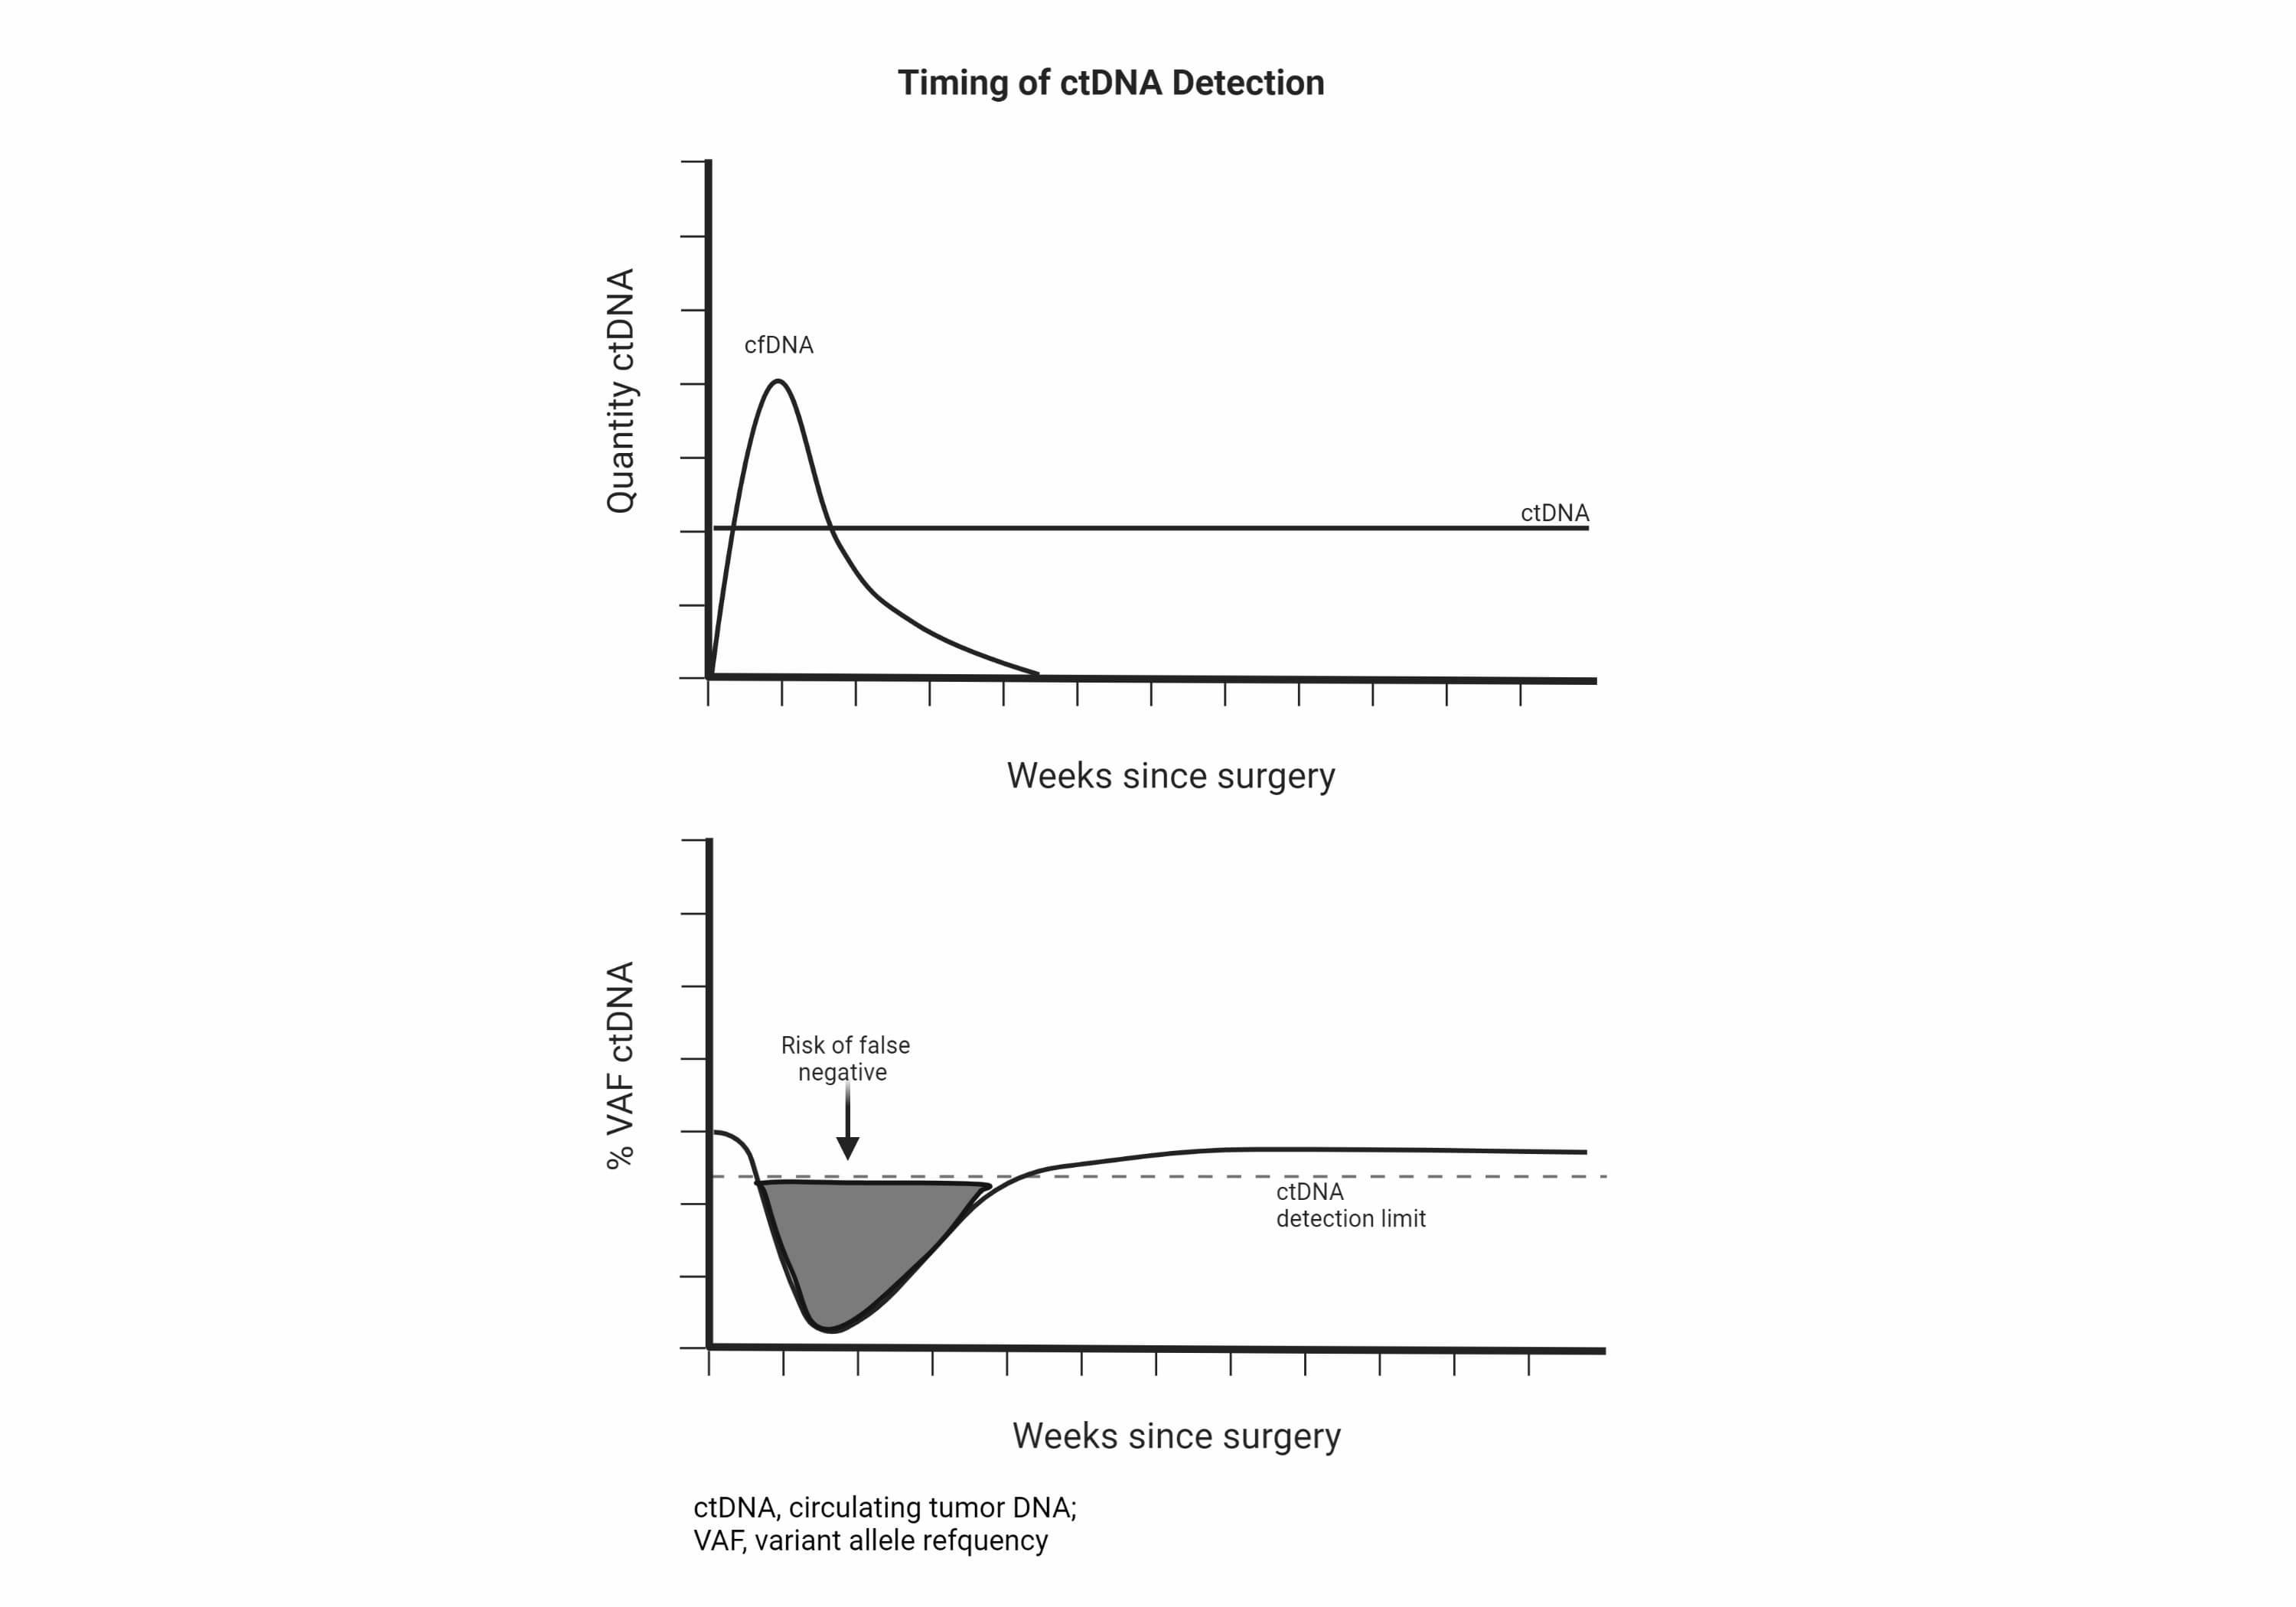 Figure 1. Timing of ctDNA Detection